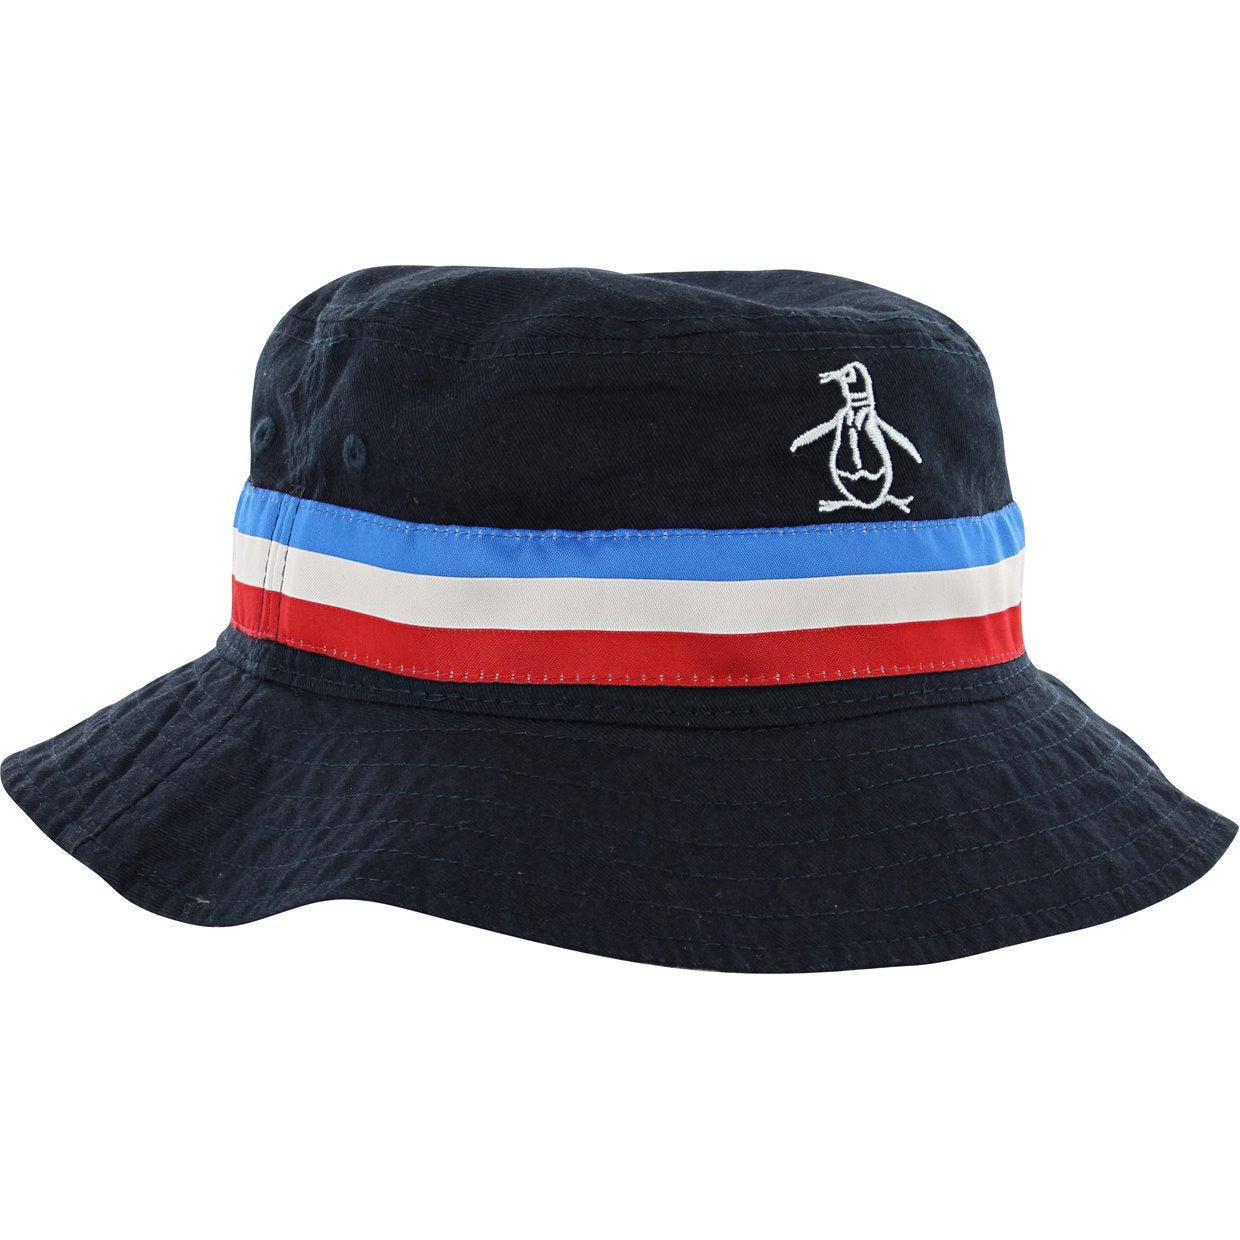 personeelszaken amateur vergroting Give your baseball caps a break and try one of these 6 trendy bucket hats